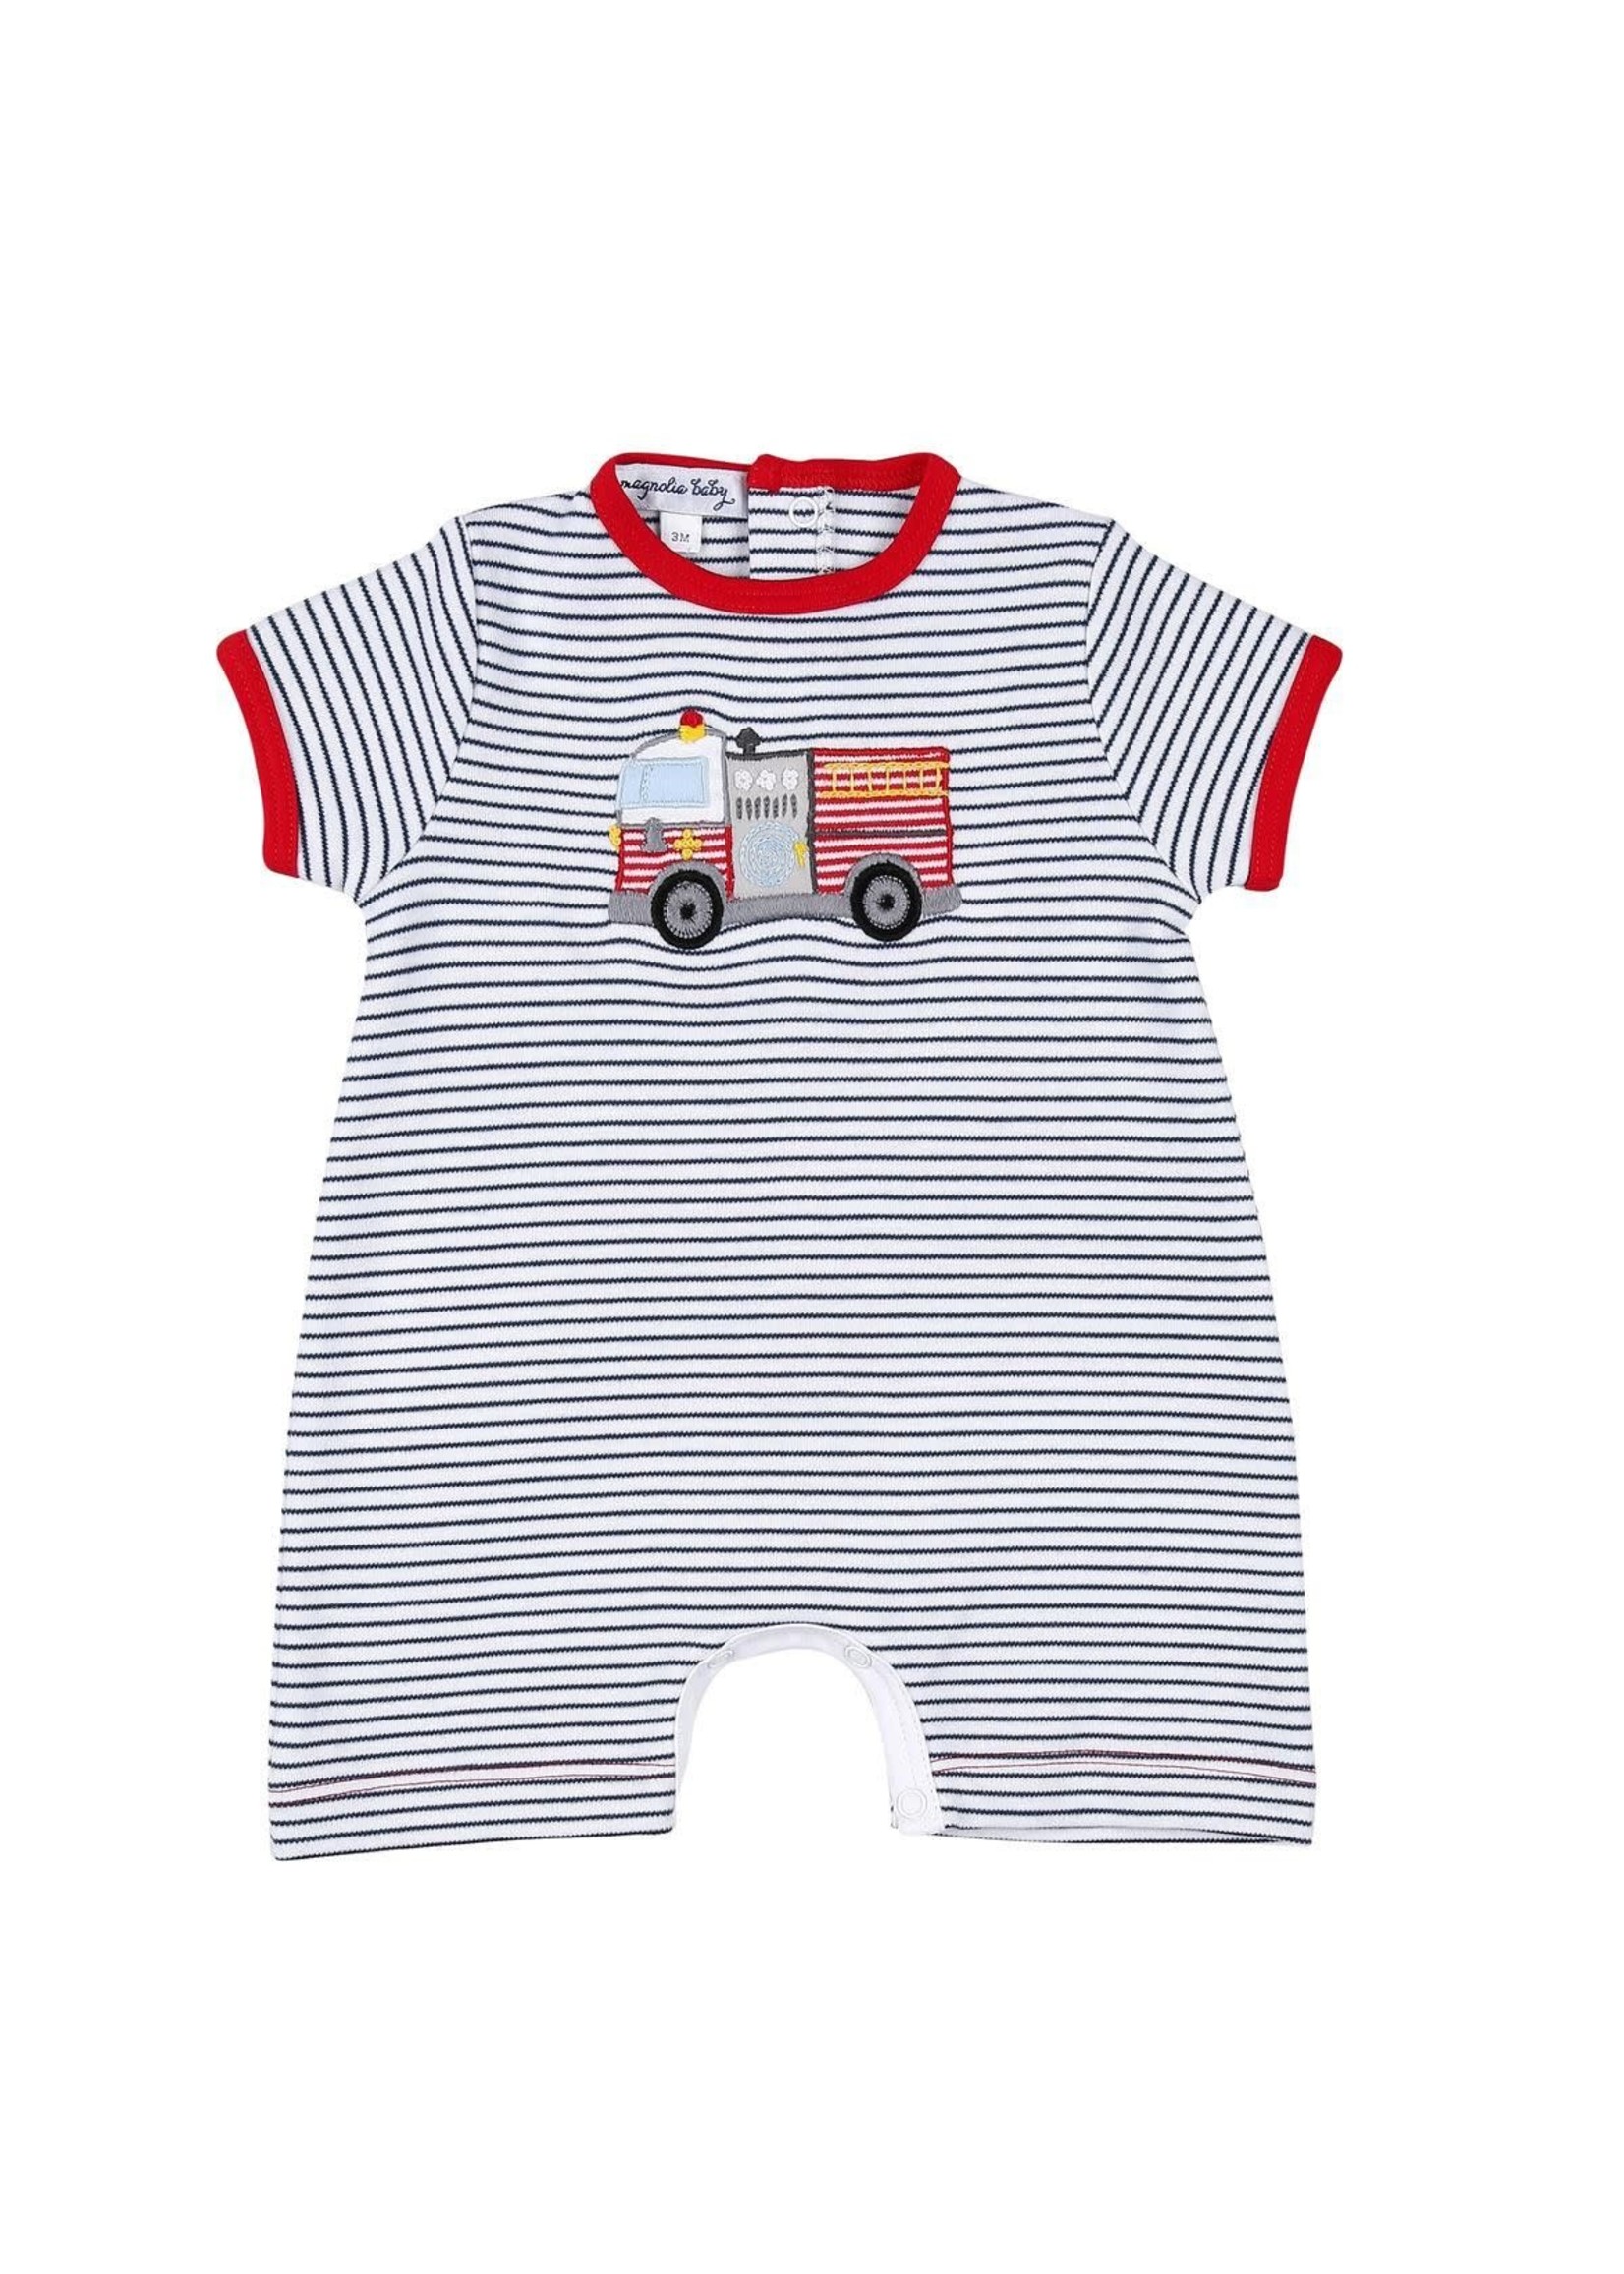 Magnolia Baby Hook and Ladder! Short Playsuit